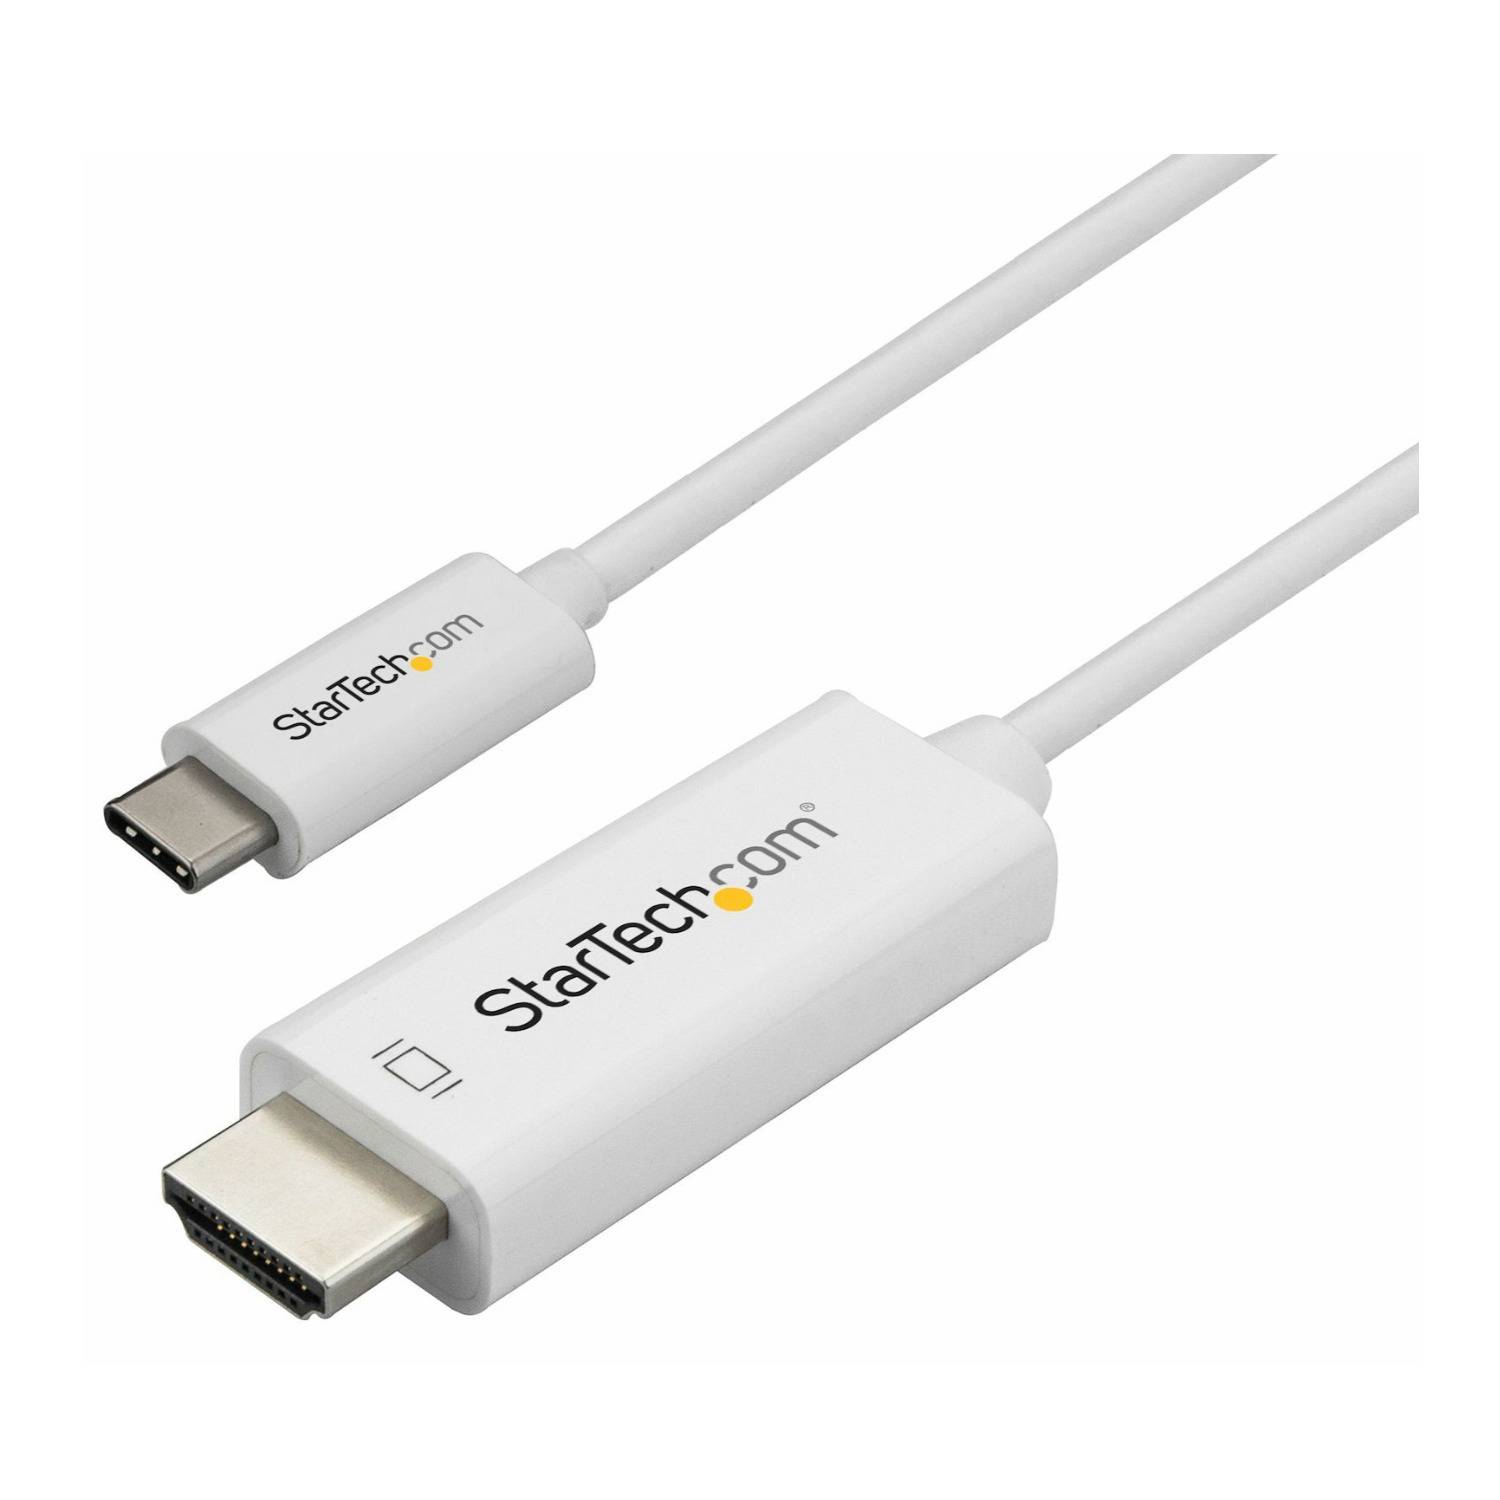 StarTech USB-C to HDMI Cable (10-Feet, White)